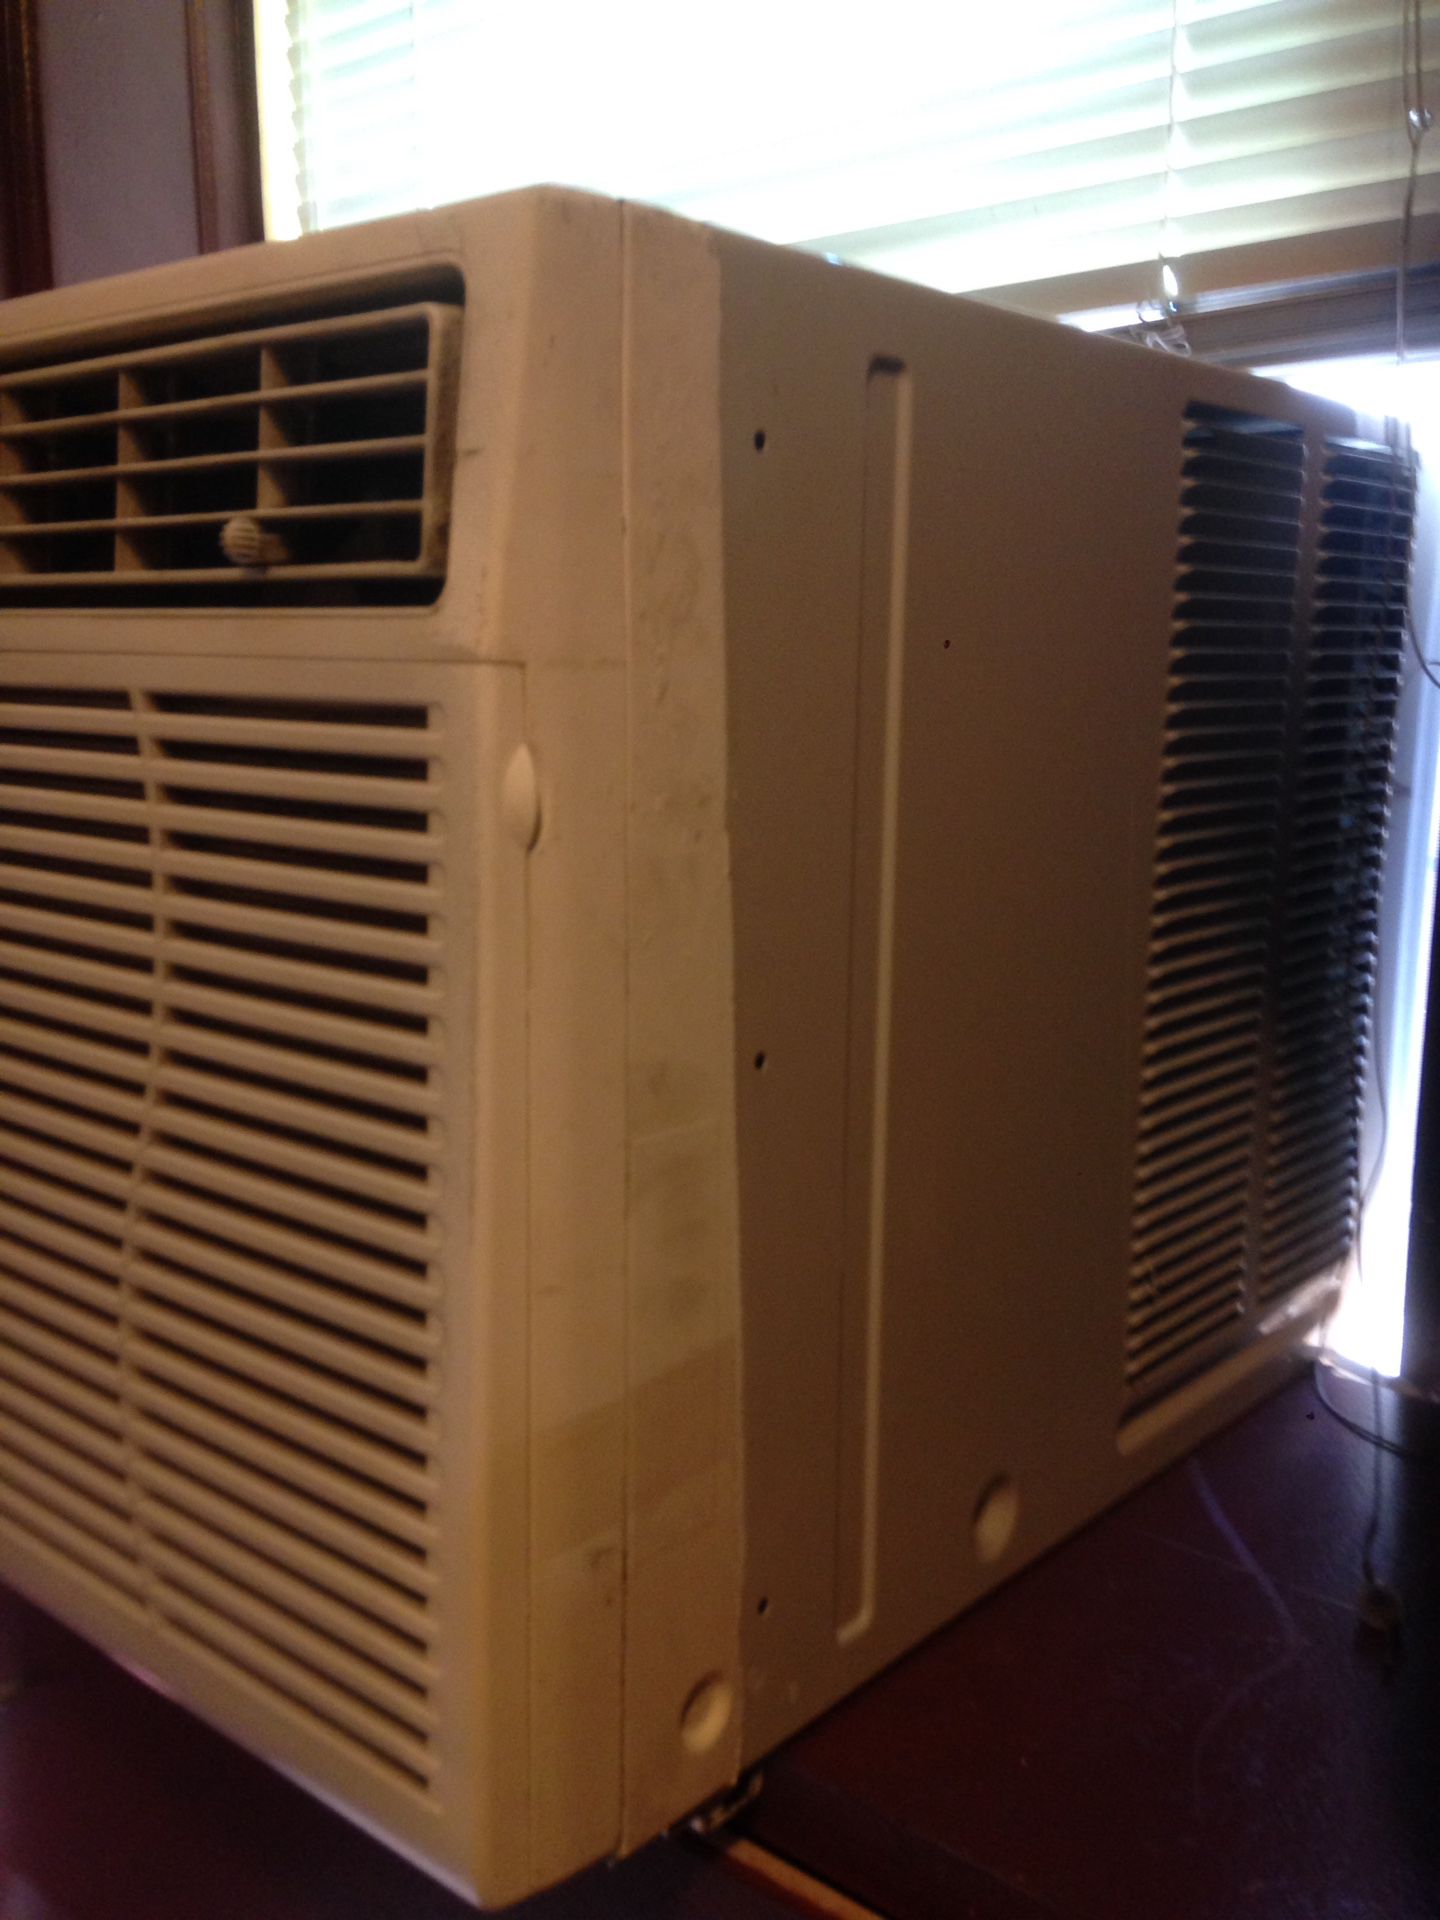 GENERAL ELECTRIC WINDOW AC 500 to 700 sf large rooms 14000btu